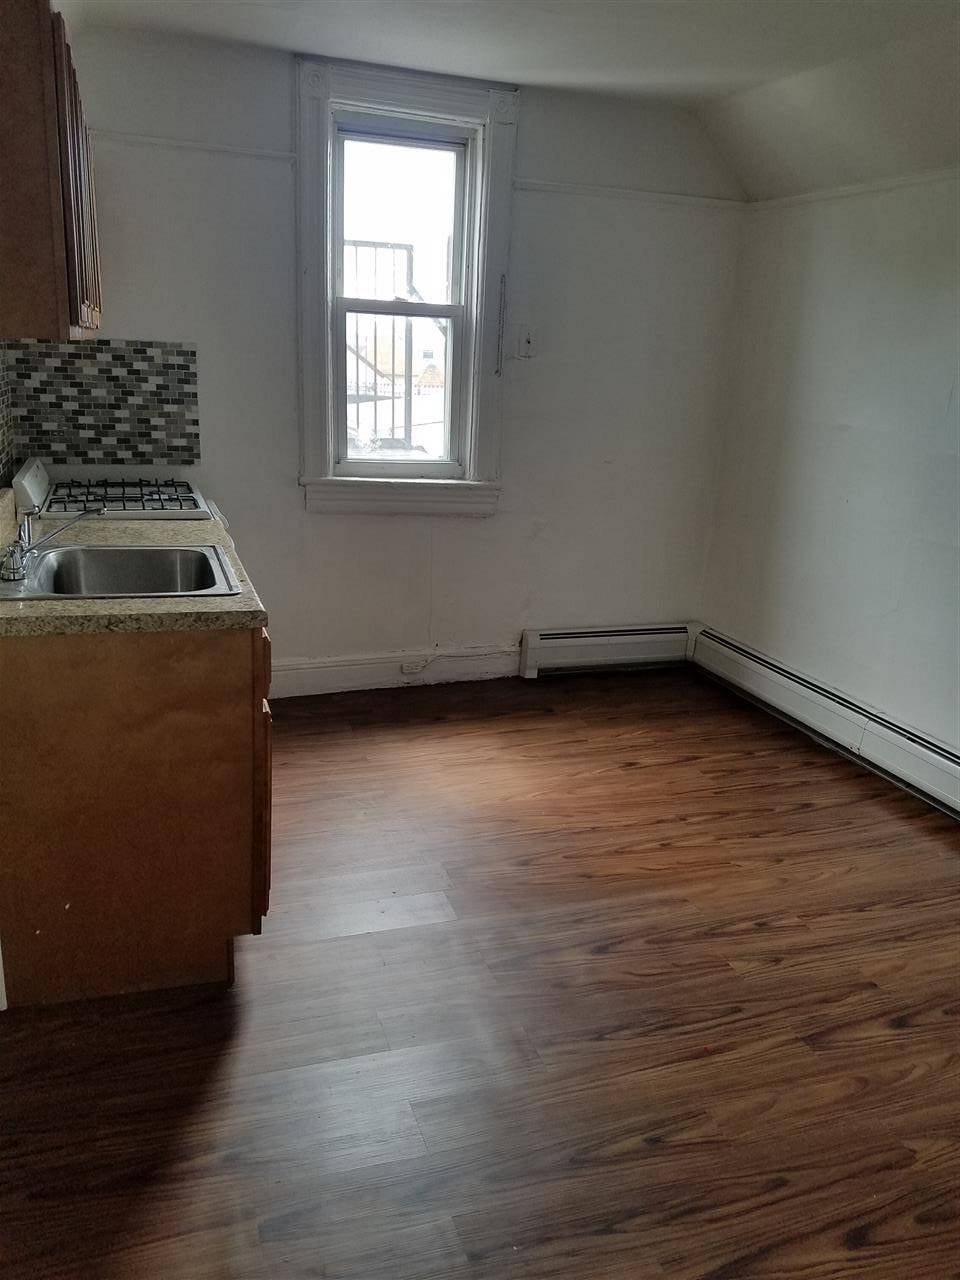 Adorable 1 bedroom on the 3rd floor of a 3 family - 1 BR New Jersey